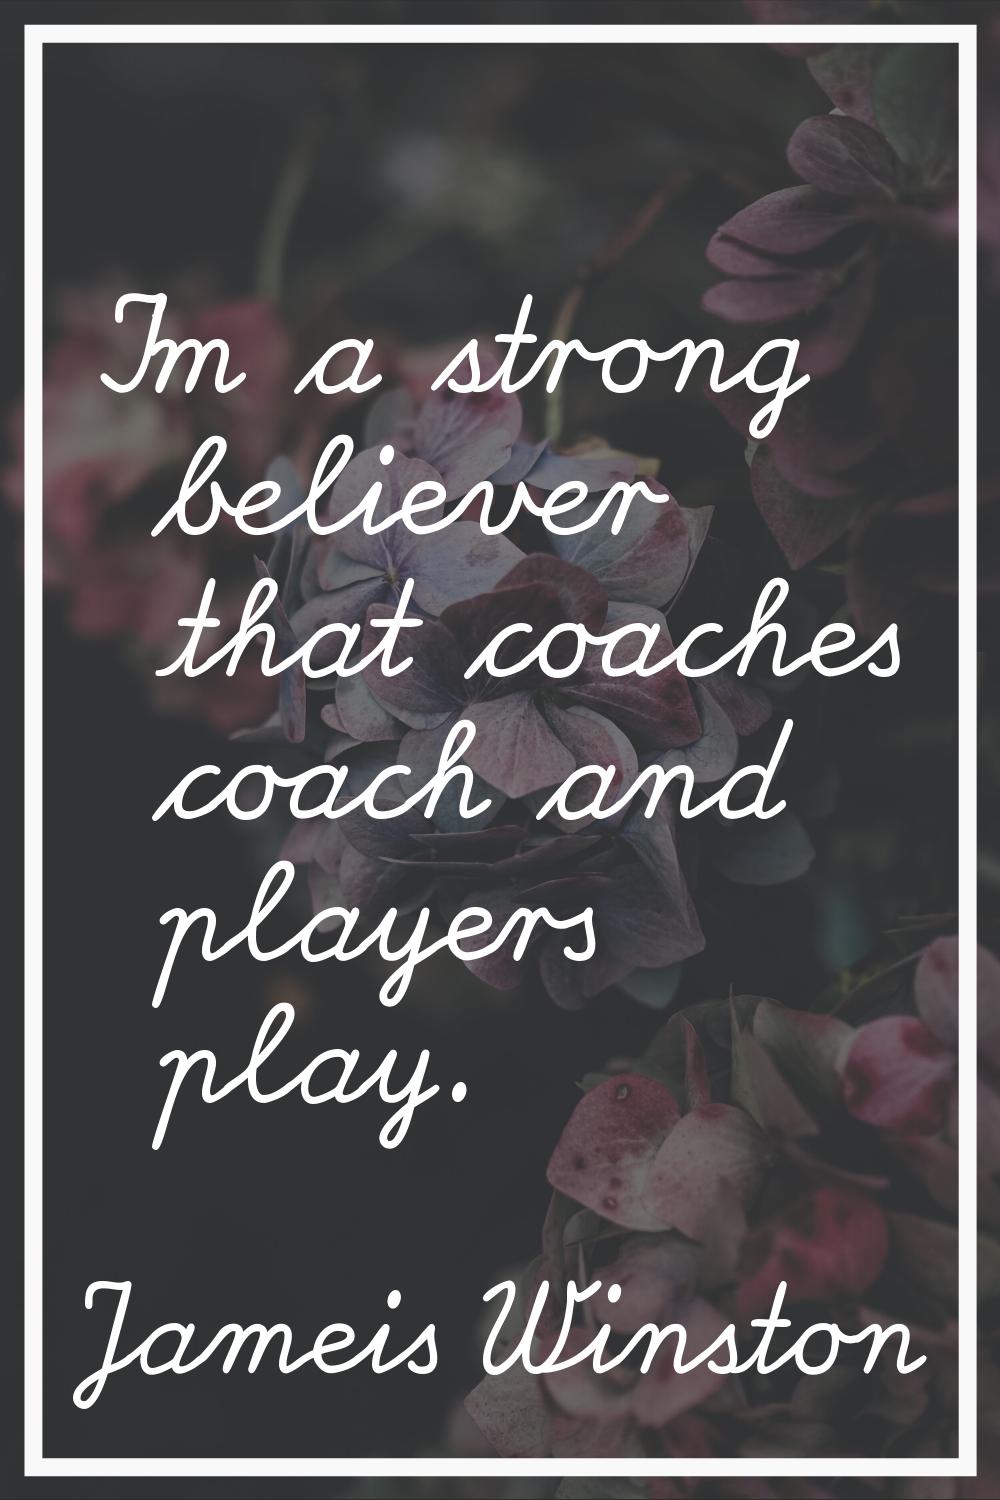 I'm a strong believer that coaches coach and players play.